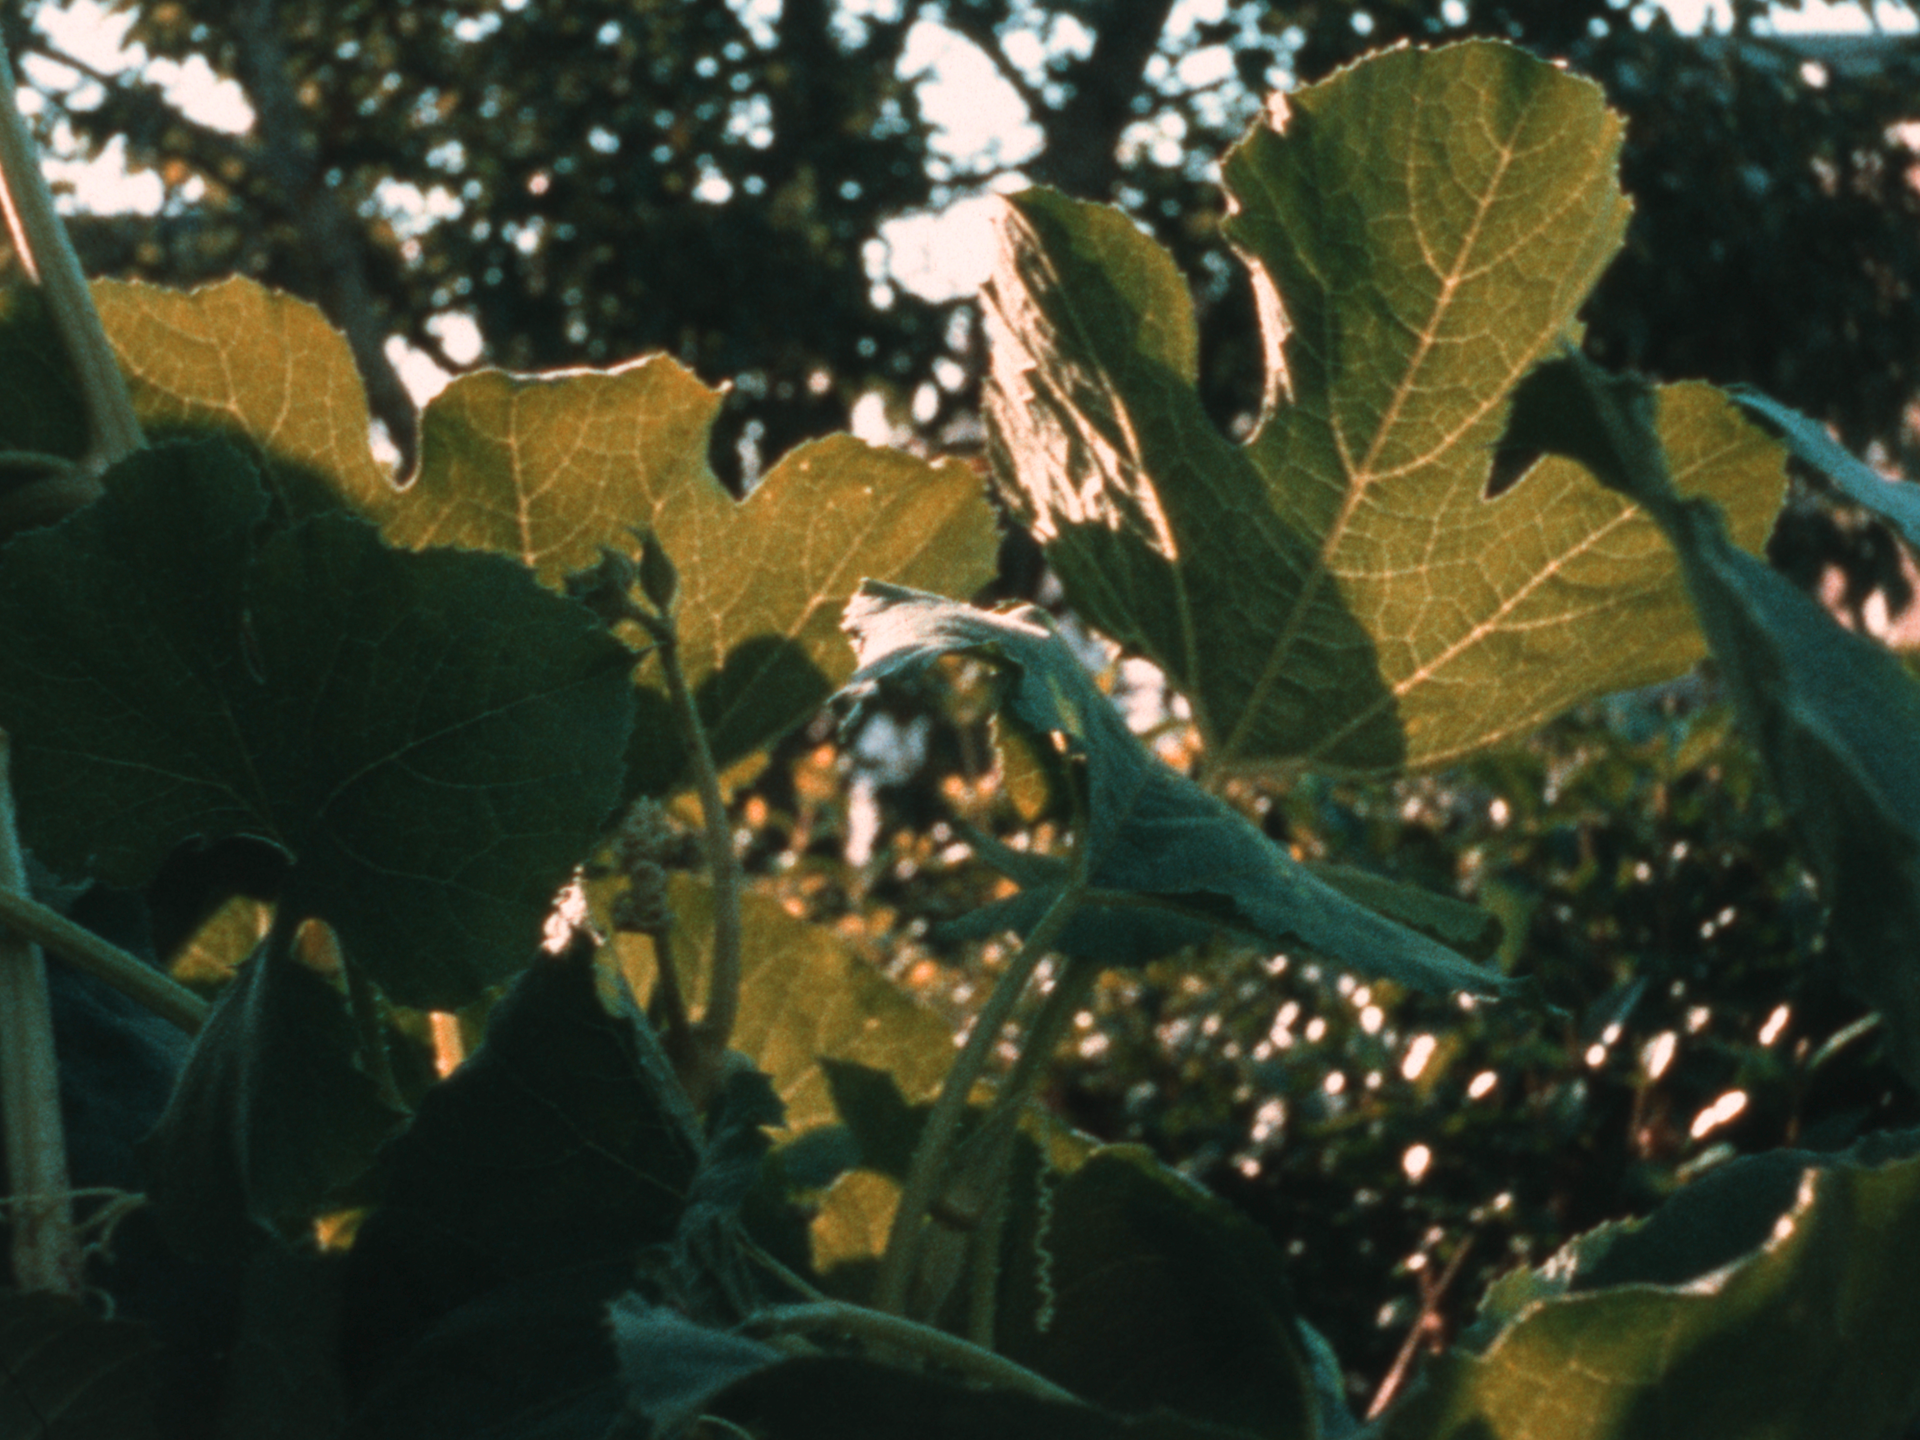 Gabby Sumney, "Watching the leaves age as I do the same", video still image.